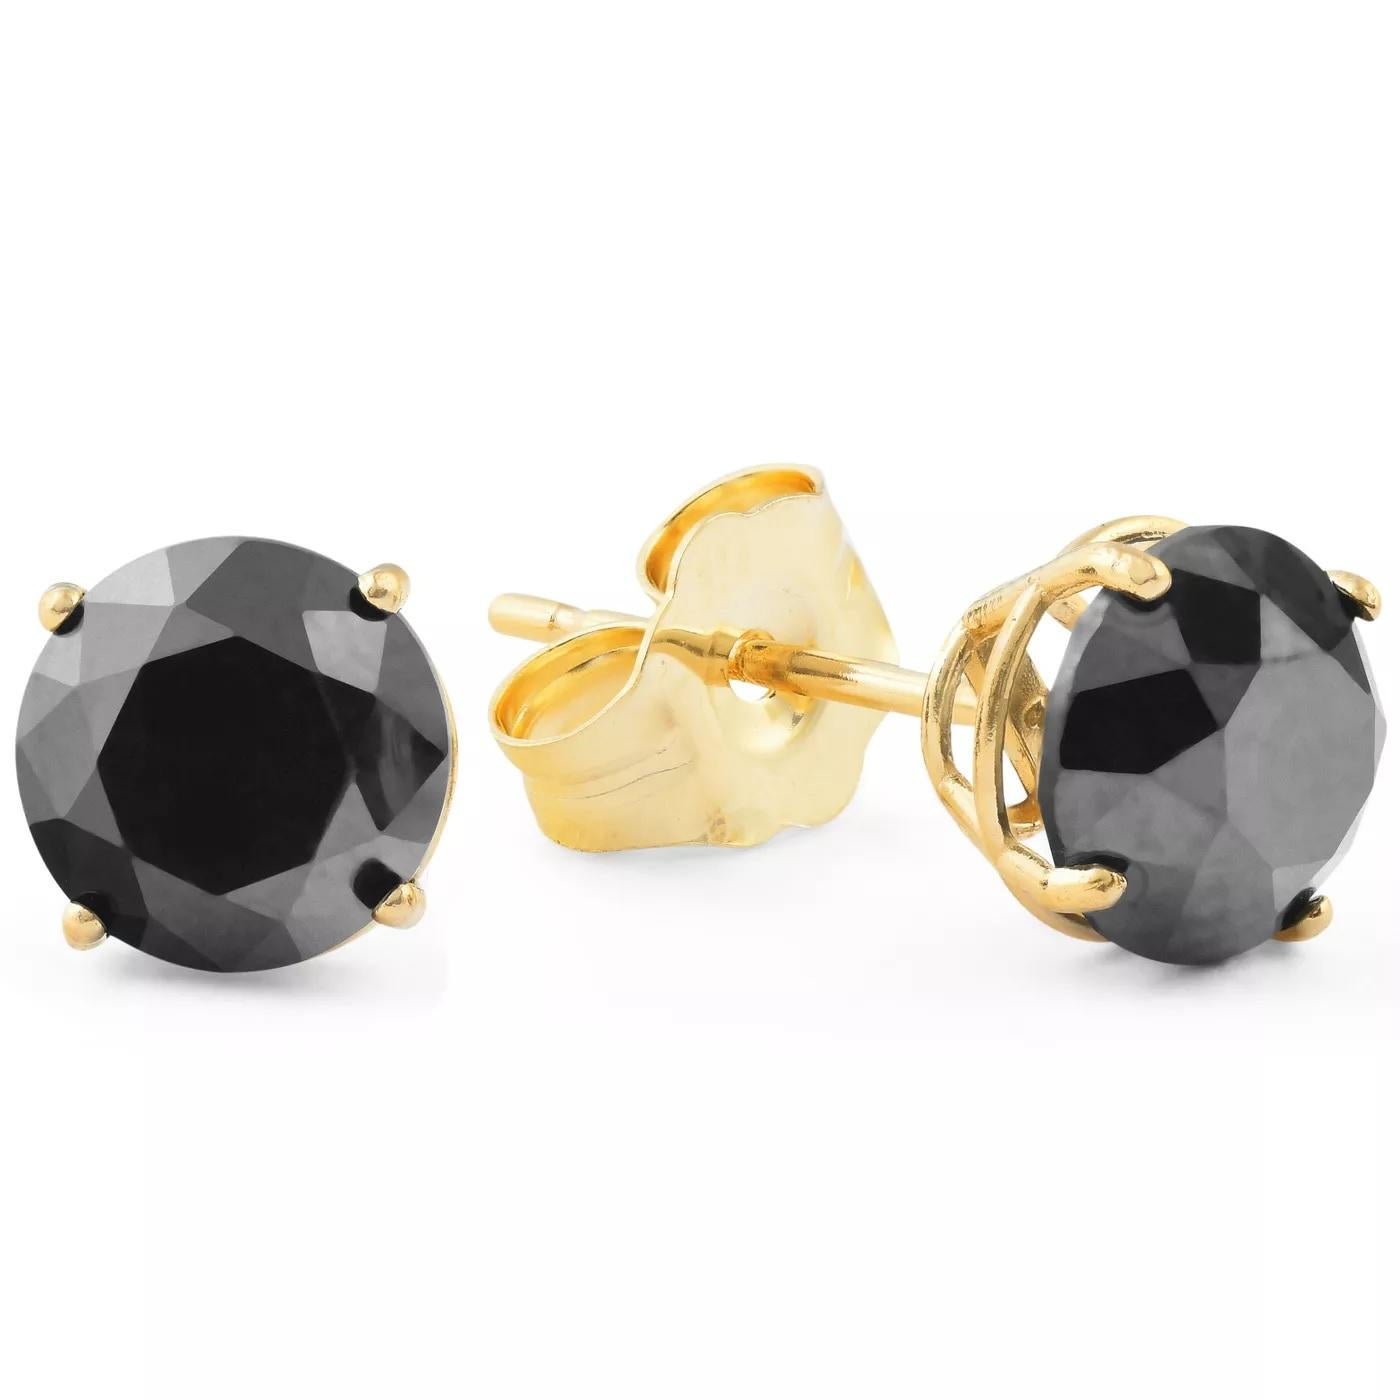 Alluring and refined, these diamond stud earrings are sure to be noticed. Created in 14 K yellow gold, the earring showcases a beguiling 1.76 carat natural black diamond solitaire measuring 6.73 x 6.71 x 5.25mm. Exquisitely made and Captivating with